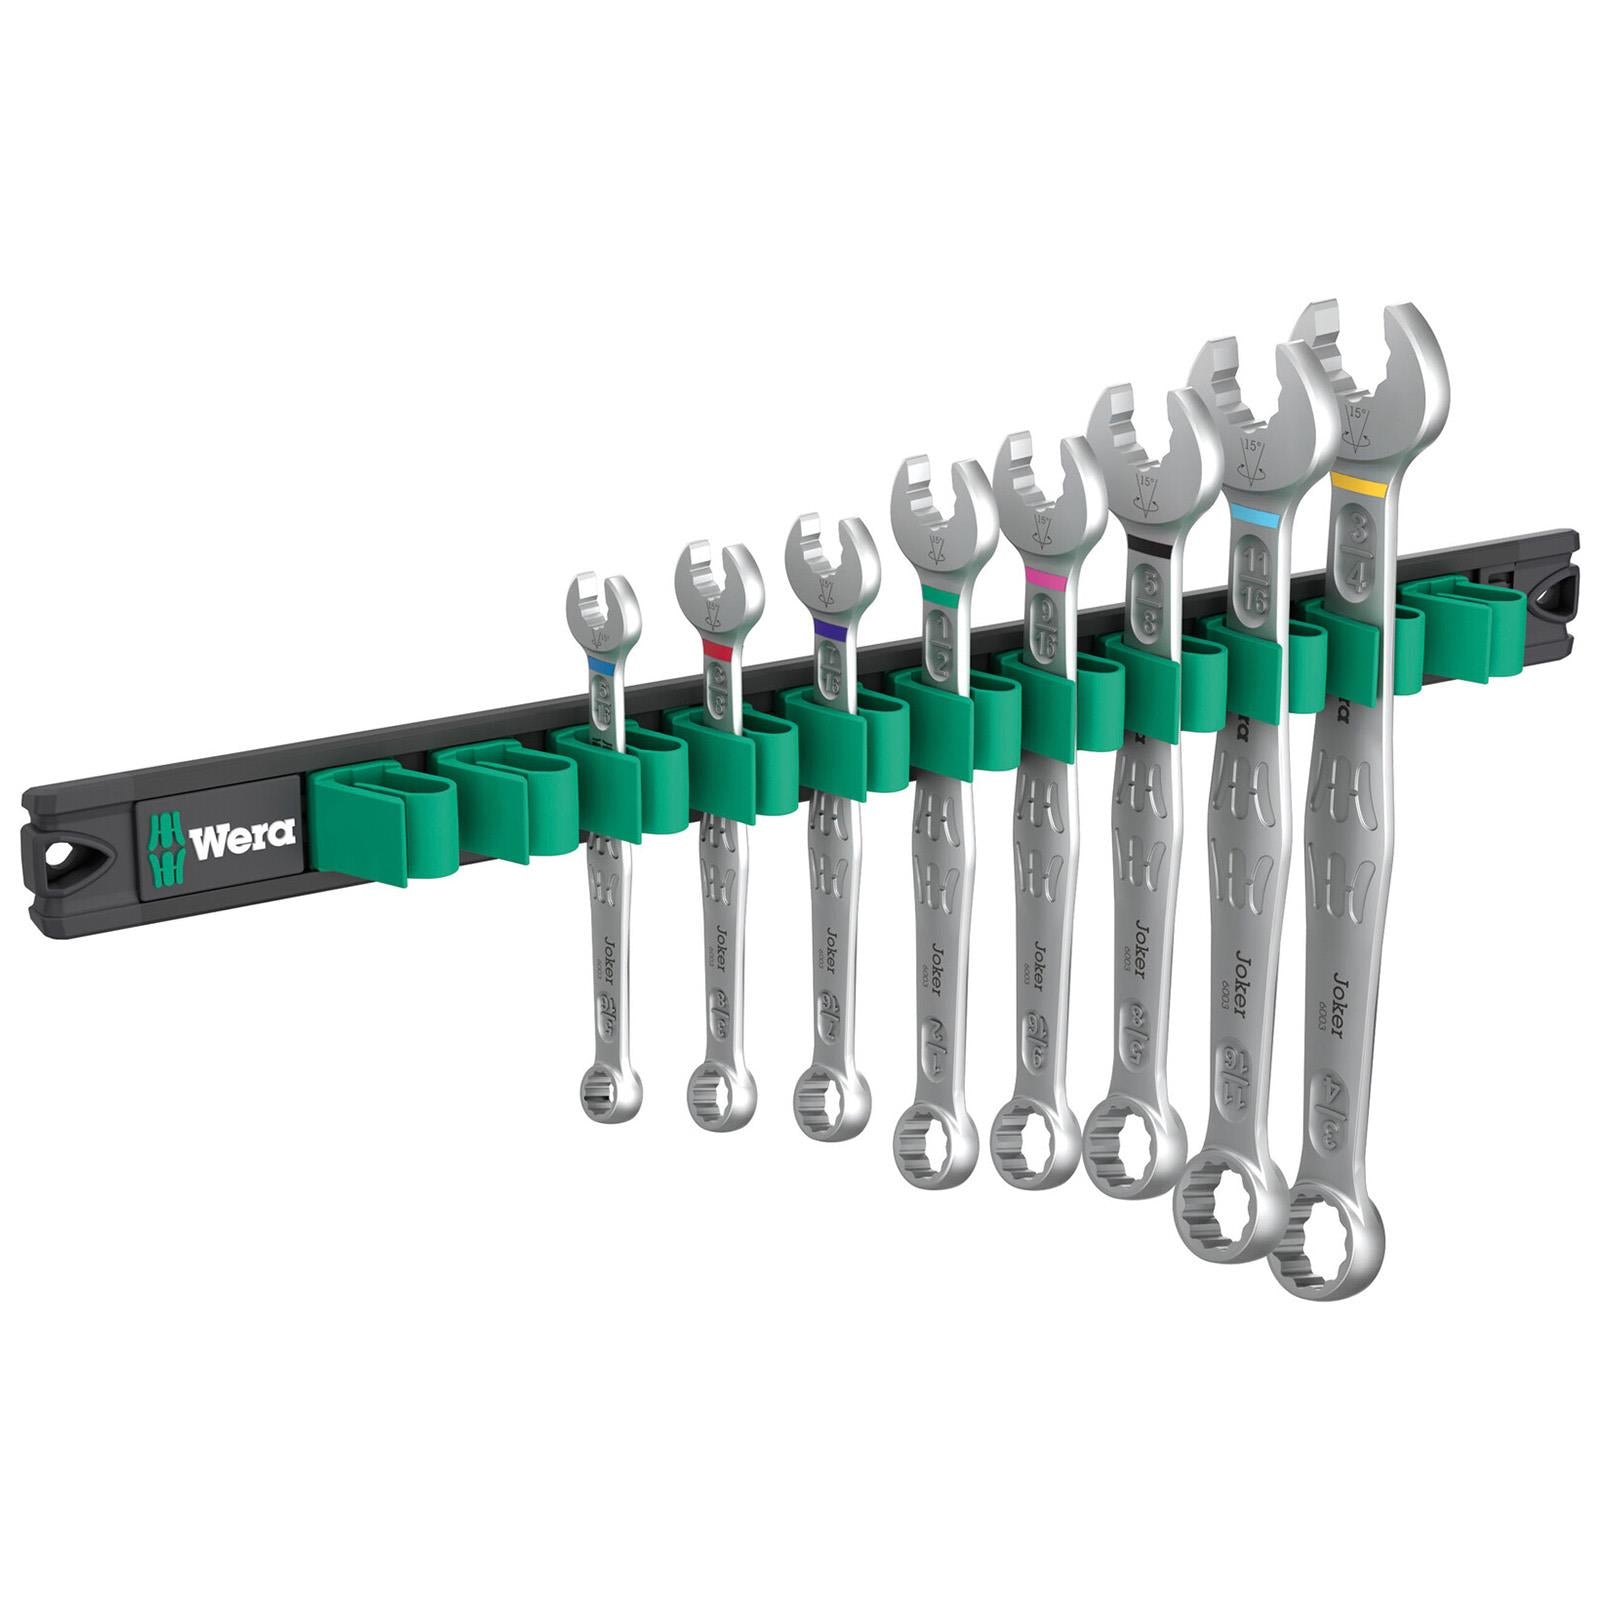 Wera Combination Spanner Wrench Set 6003 Joker Imperial 1 9642 Magnetic Rail 8 Pieces 5/16"-3/4